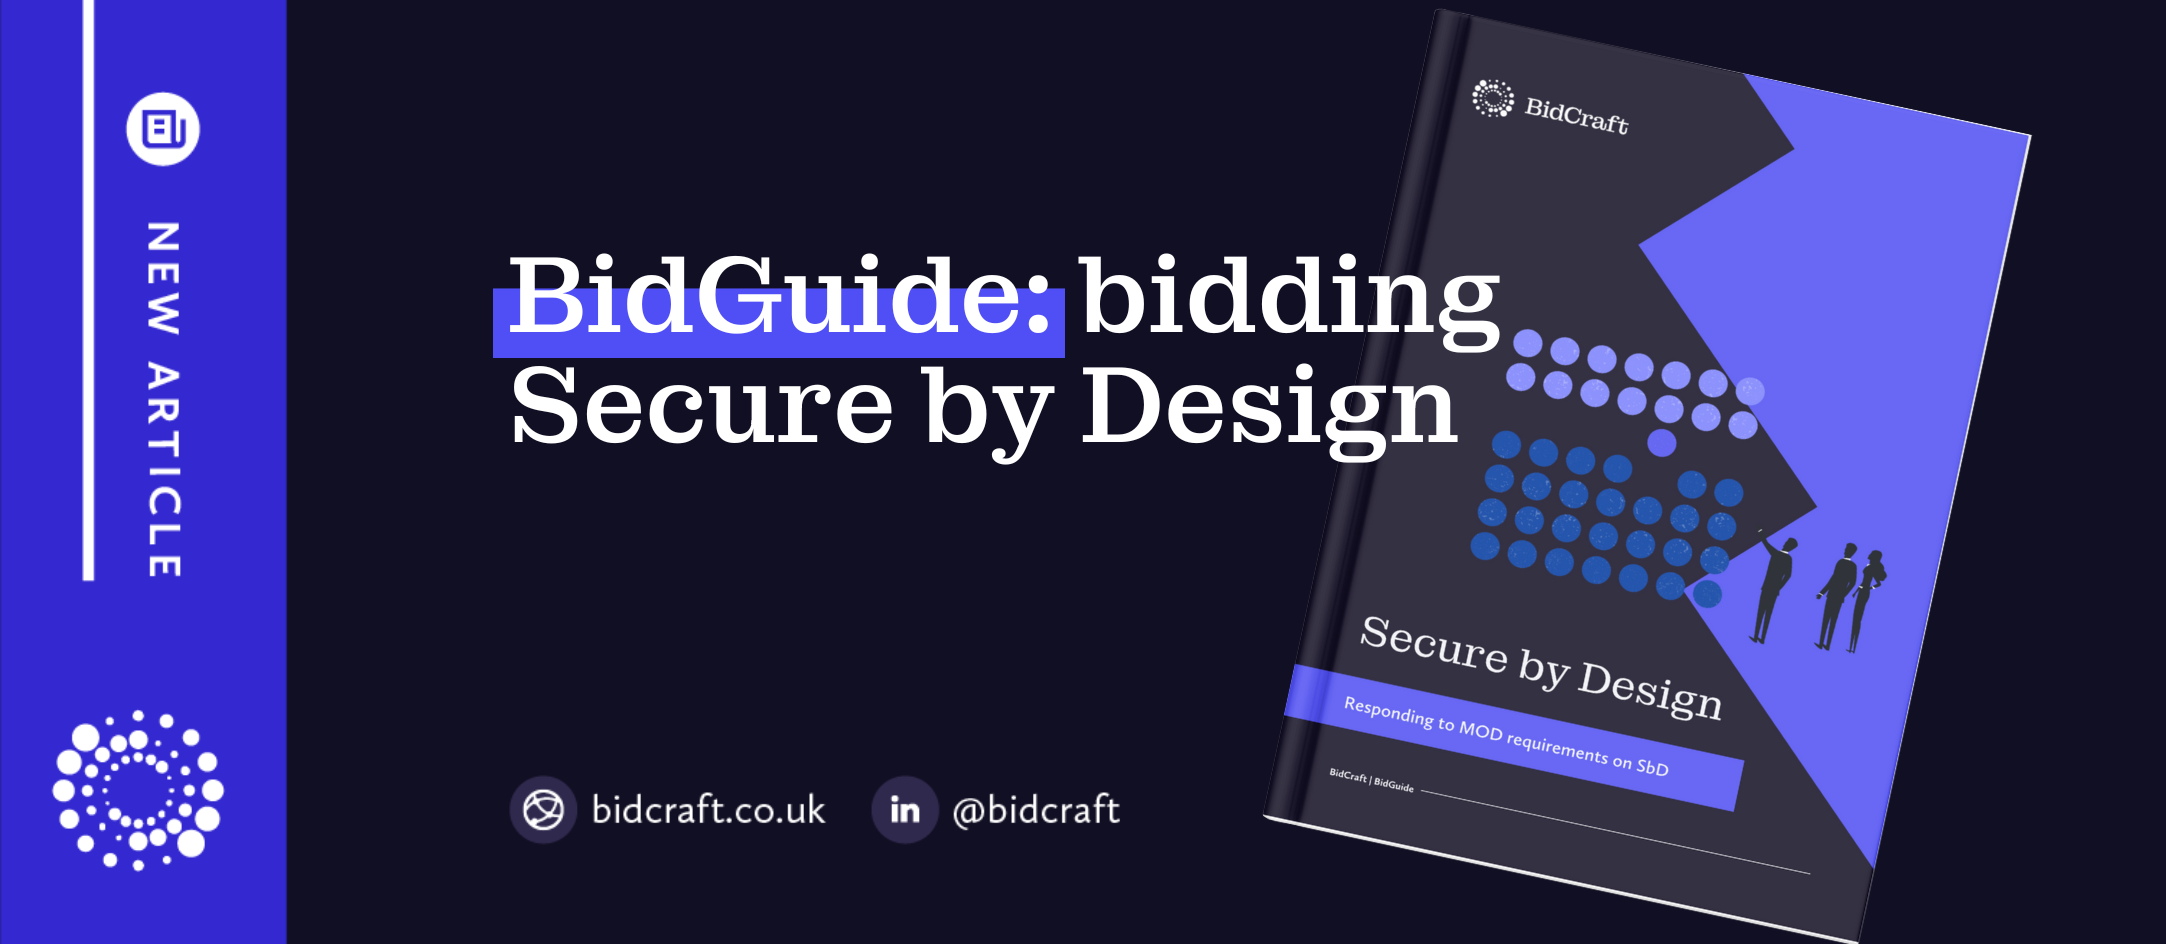 BidGuide for Secure by Design